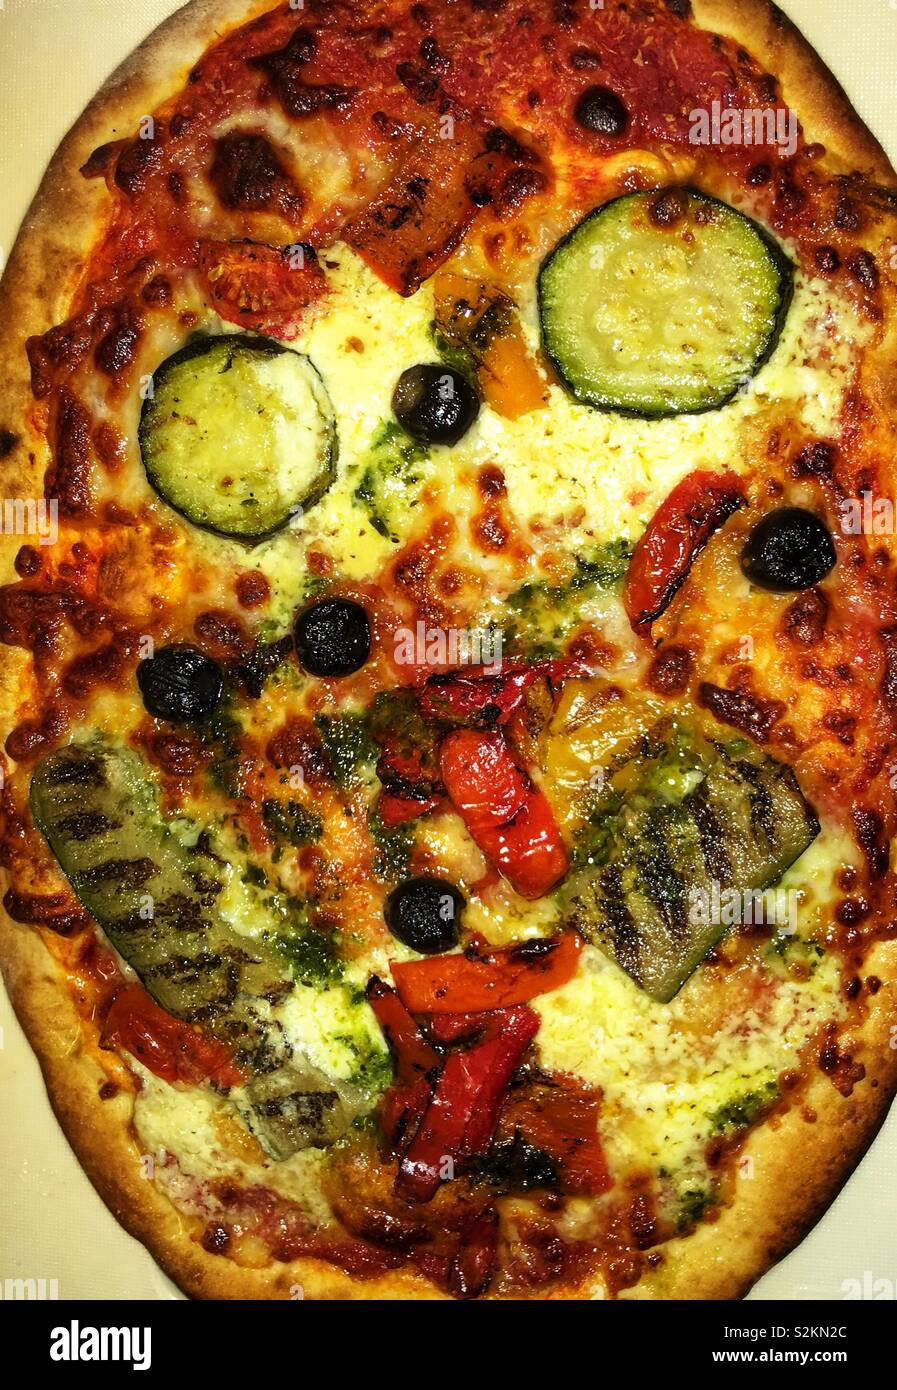 Smiling Pizza. Food picture depicting a freshly cooked pizza showing a similarity to a smiling face. Stock Photo